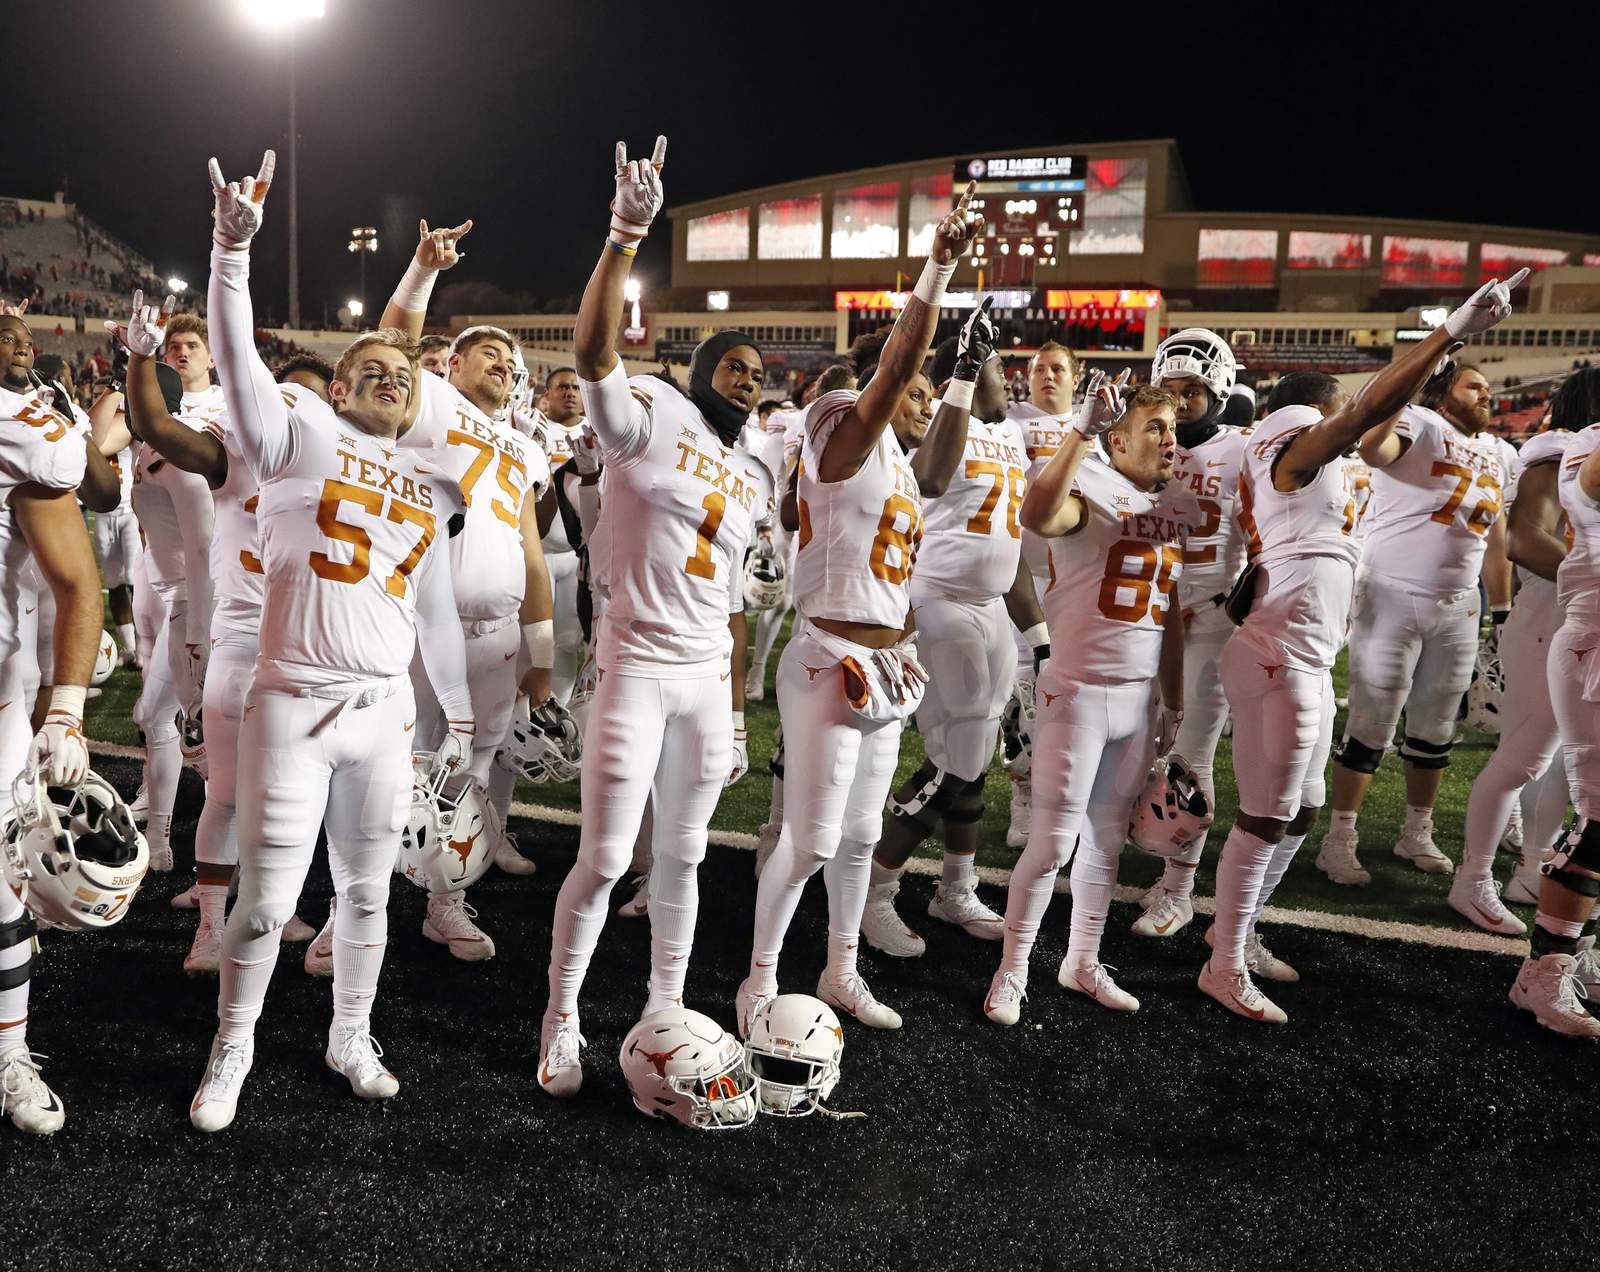 Herman says no mandate for Texas players over school song